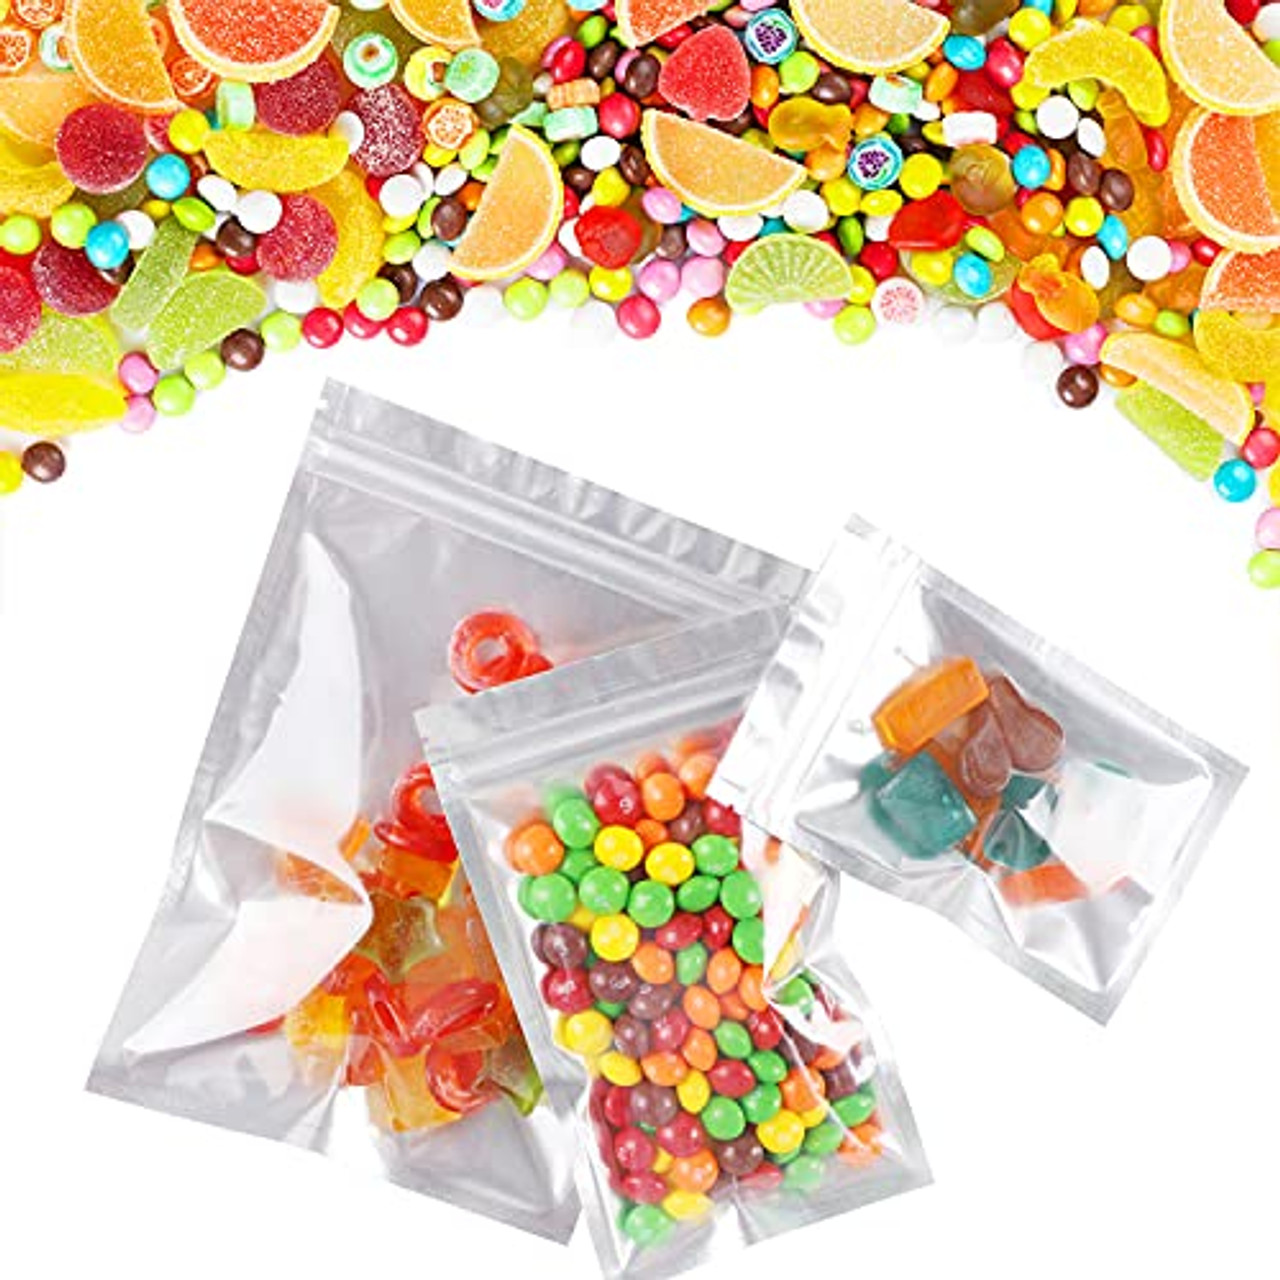 100 Packs Resealable Mylar Bags with Clear Window and Label, Smell Proof Bags Resealable Mylar Bag, Food Storage Bag Holographic Bags, Packaging Pouch